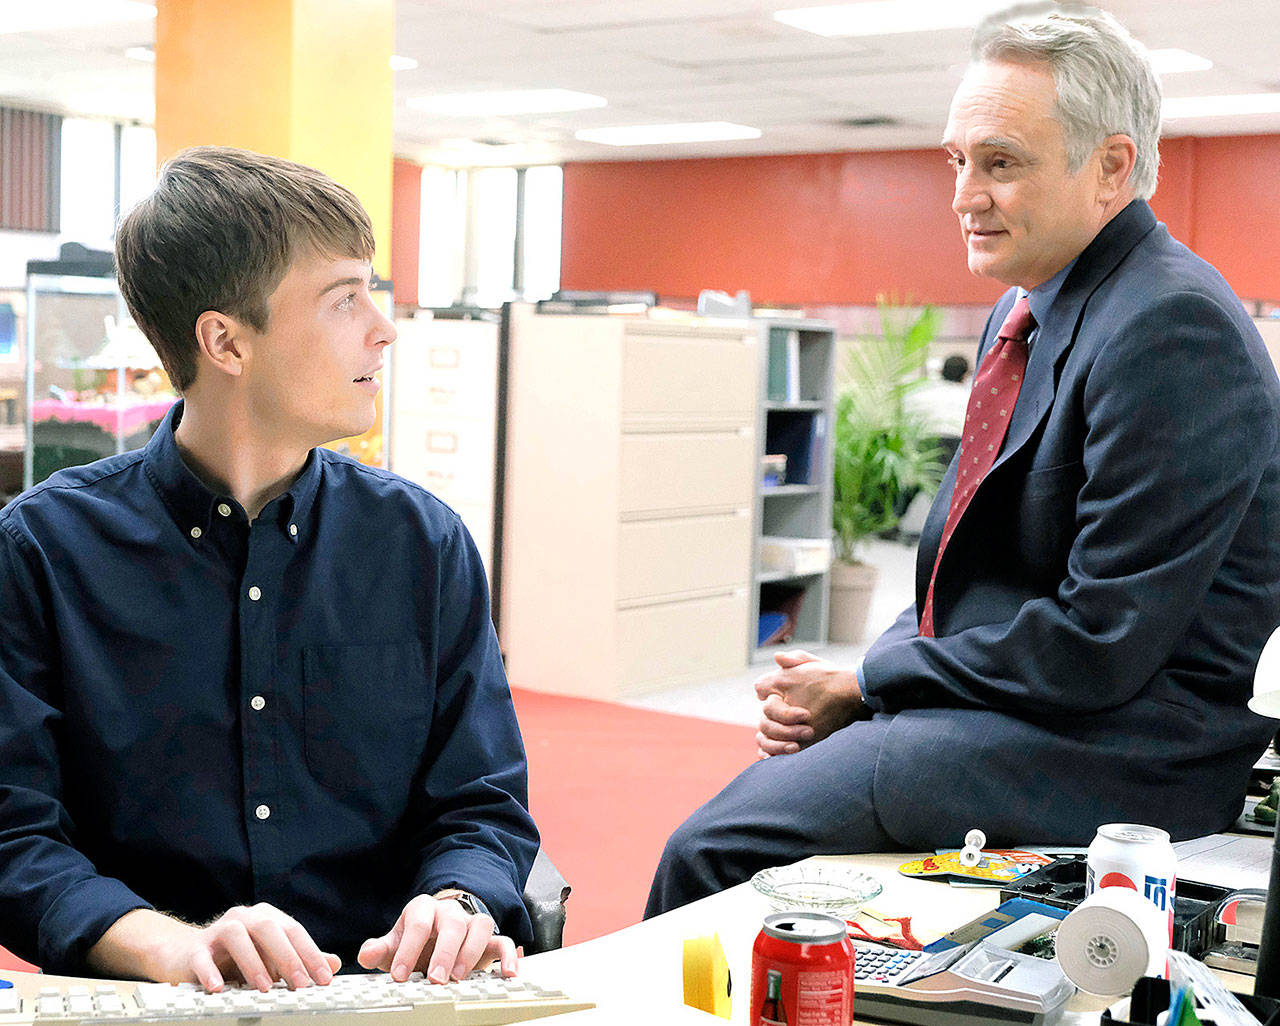 John Karna (left) and Bradley Whitford co-star in the National Geographic’s series “Valley of the Boom,” which explores the birth of the internet. (Bettina Strauss/National Geographic)